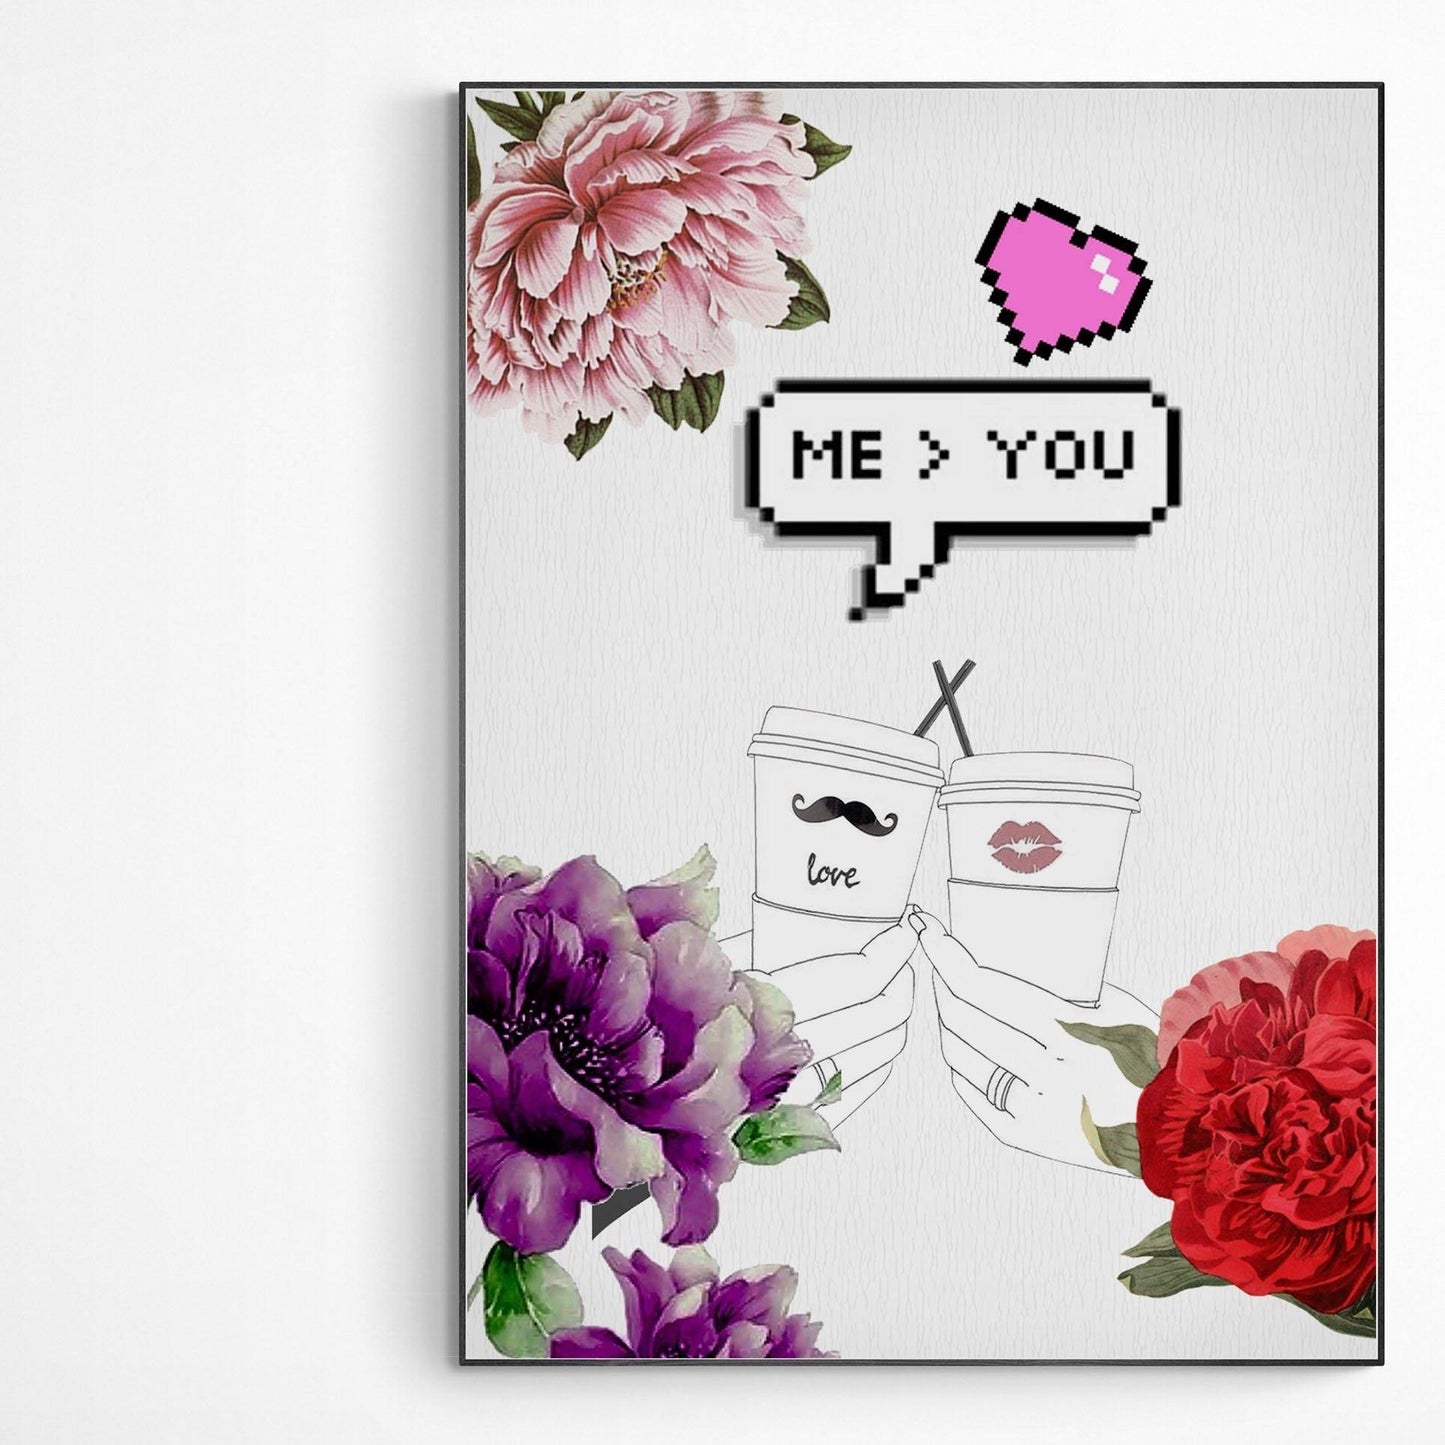 I Love You Poster | Original Poster Art | Gay Print Quote | Motivational Poster Wall Art Decor | Greeting Card Gifts | Variety Sizes